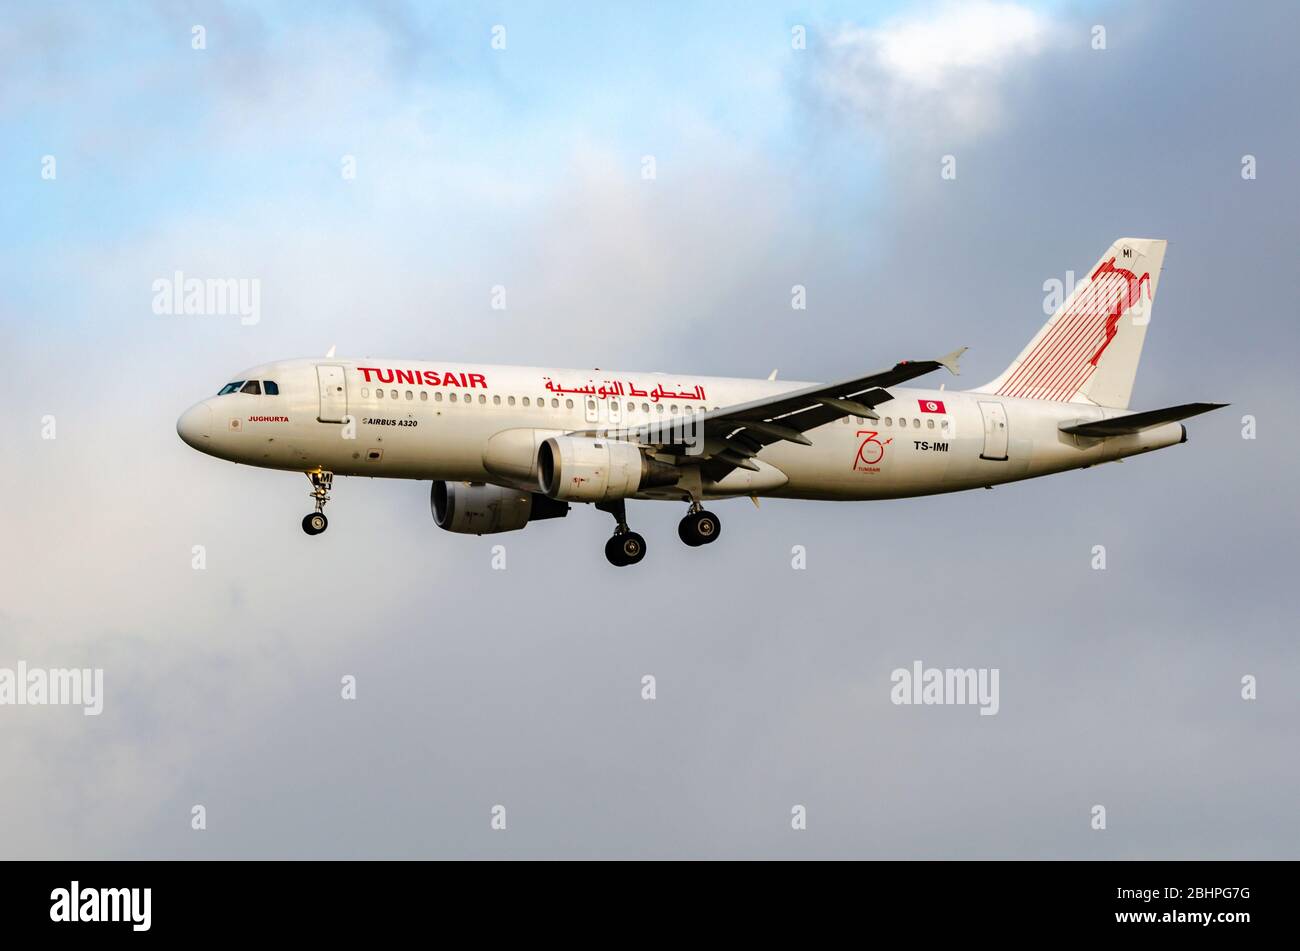 FRANKFURT, HESSE GERMANY - DECEMBER 23: Airbus A320 of Tunisair arriving at Frankfurt airport. Tunisair is the flag carrier airline of Tunisia. Stock Photo